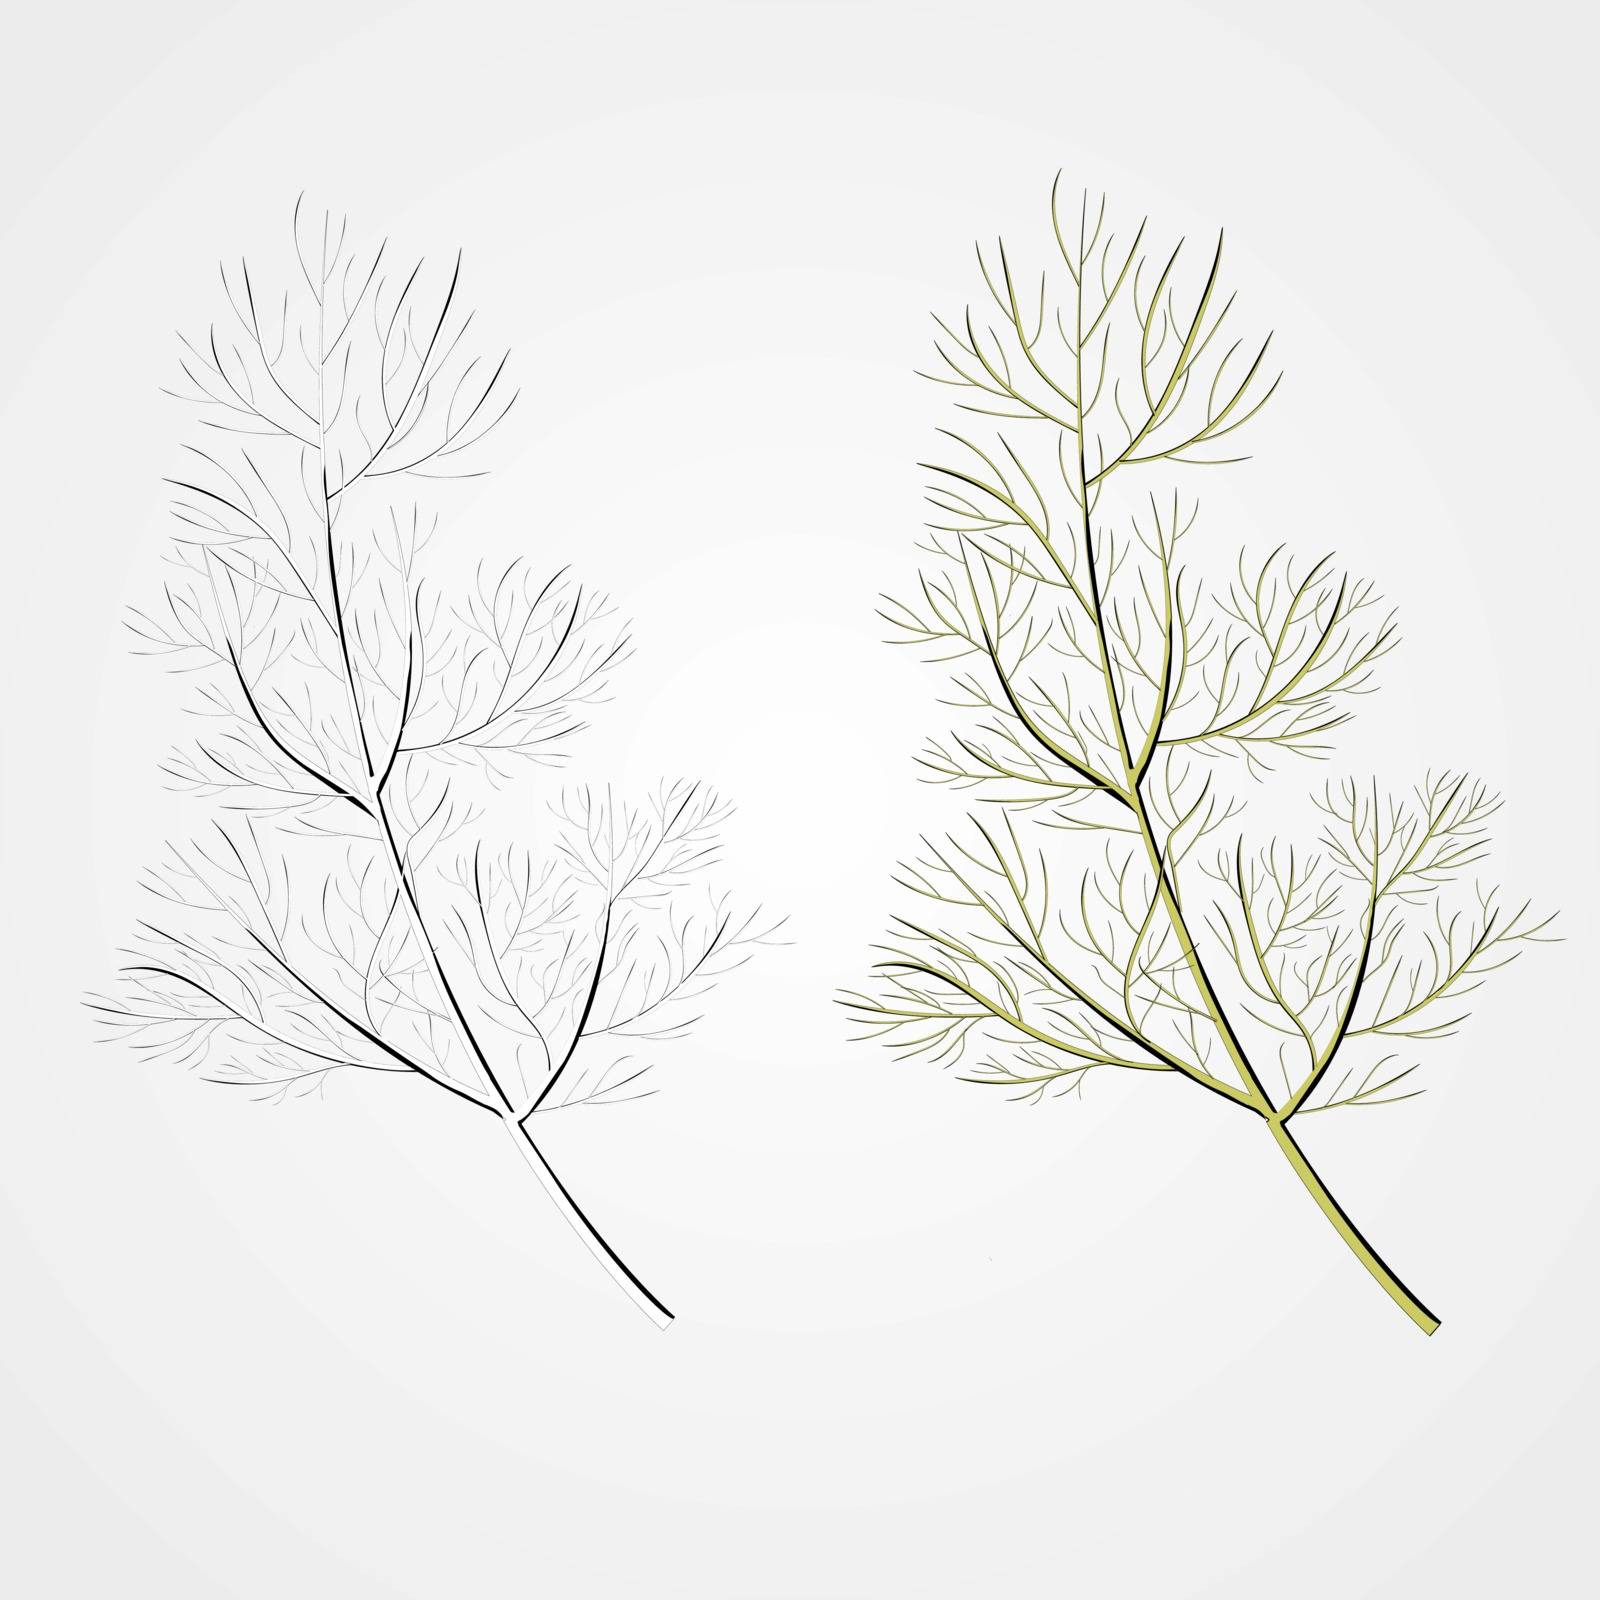 A sprig of dill. Isolated vector illustration. Herbal nature plant. Botanical illustration by Graffiti21